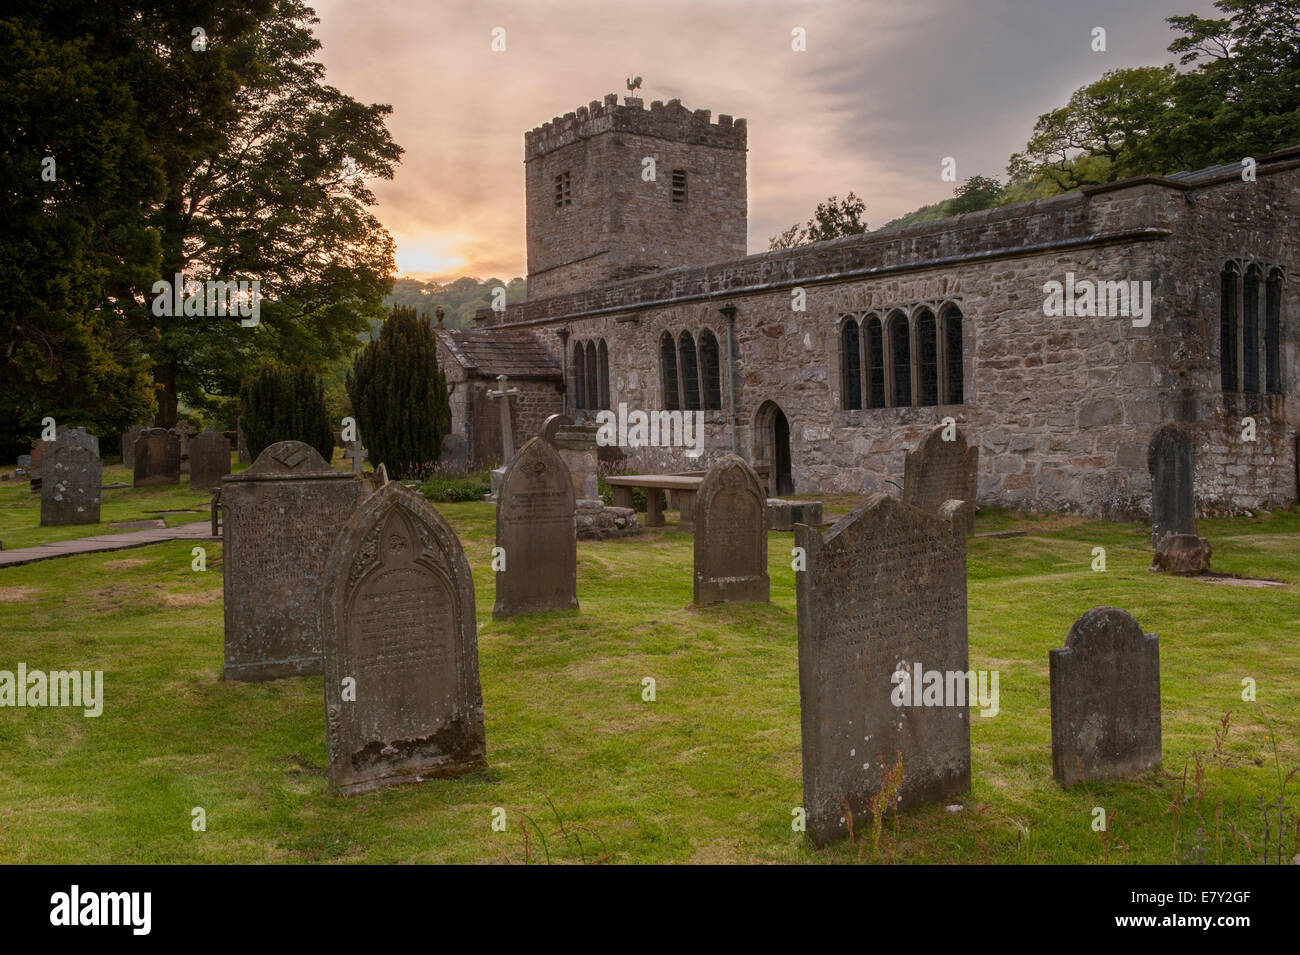 Exterior of St Michael and All Angels Church with headstones in churchyard under colourful sky at sunset - Hubberholme, Yorkshire Dales, England, UK. Stock Photo